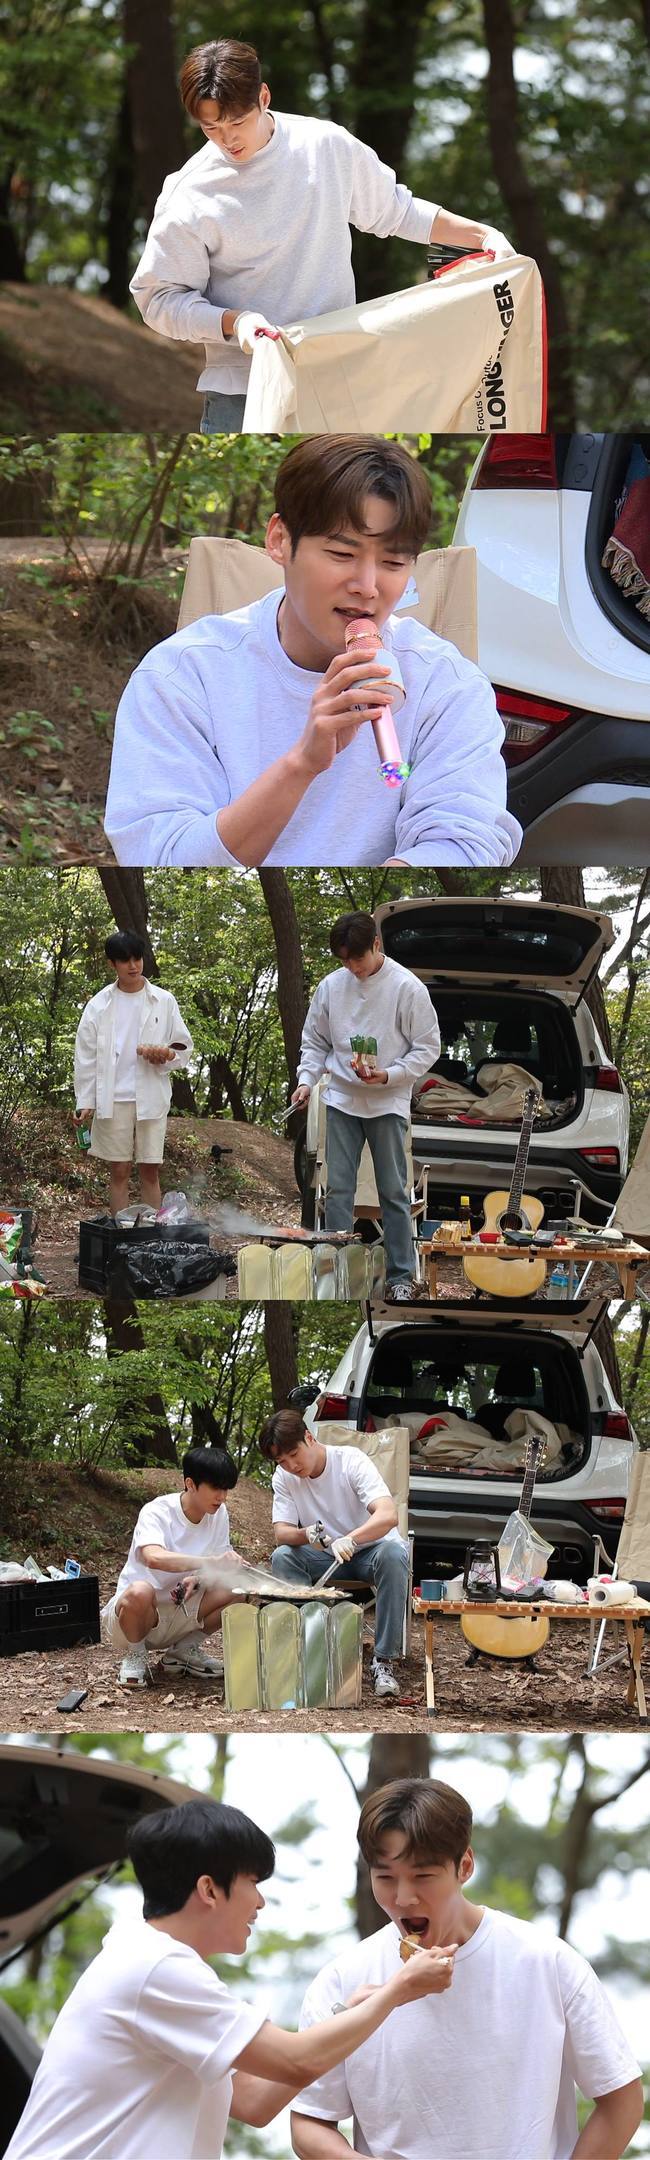 Choi Jin-hyuks Huhdang Chabak Camping is unveiled.On May 23, at 9:05 pm, SBS My Little Old Boy, Equipment Collector Choi Jin-hyuk emits innocent charm with the first experience of unforgettable hallucination, Chabak Camping.Choi Jin-hyuk recently left the hot emotional chabak Camping with his best brother and actor gifted who appeared in the drama.Chen He, who boasted the equipment filled with trunks as soon as he arrived at the Camping Field, showed his confidence with his own iron rule, Camping is equipment.However, after a while, Chen He, who failed to hit the shade tent, took out the wrong solution of I can find the shade and caused both the gifted and the benjaths sigh and laughter.In addition, Chen He started cooking with pride, saying, Emotionality is after dinner, but he could not even open the package of the Instant rice, and he showed off his tremendous fuss, such as missing the kimchi in his hand and making it splash on white clothes.The gifted said, My brother was not this brother!